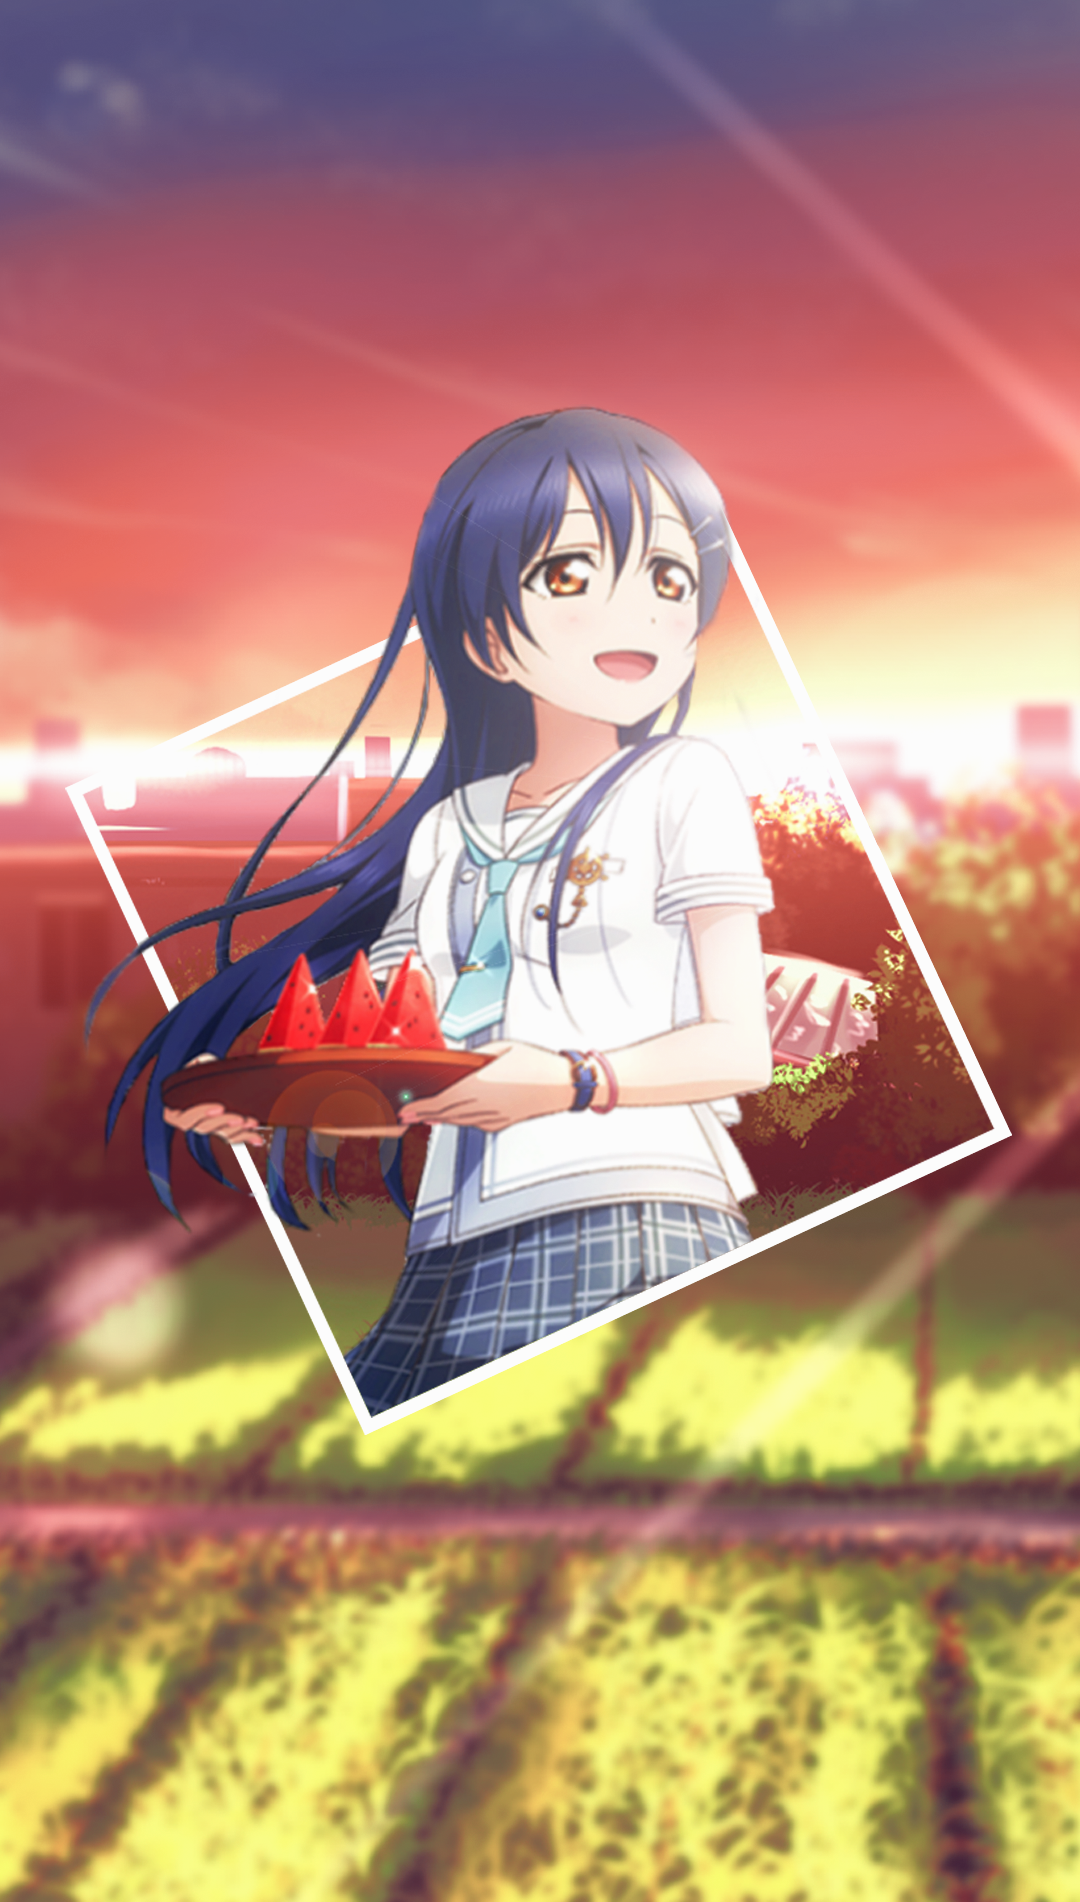 Anime 1080x1902 anime anime girls picture-in-picture Love Live! Sonoda Umi